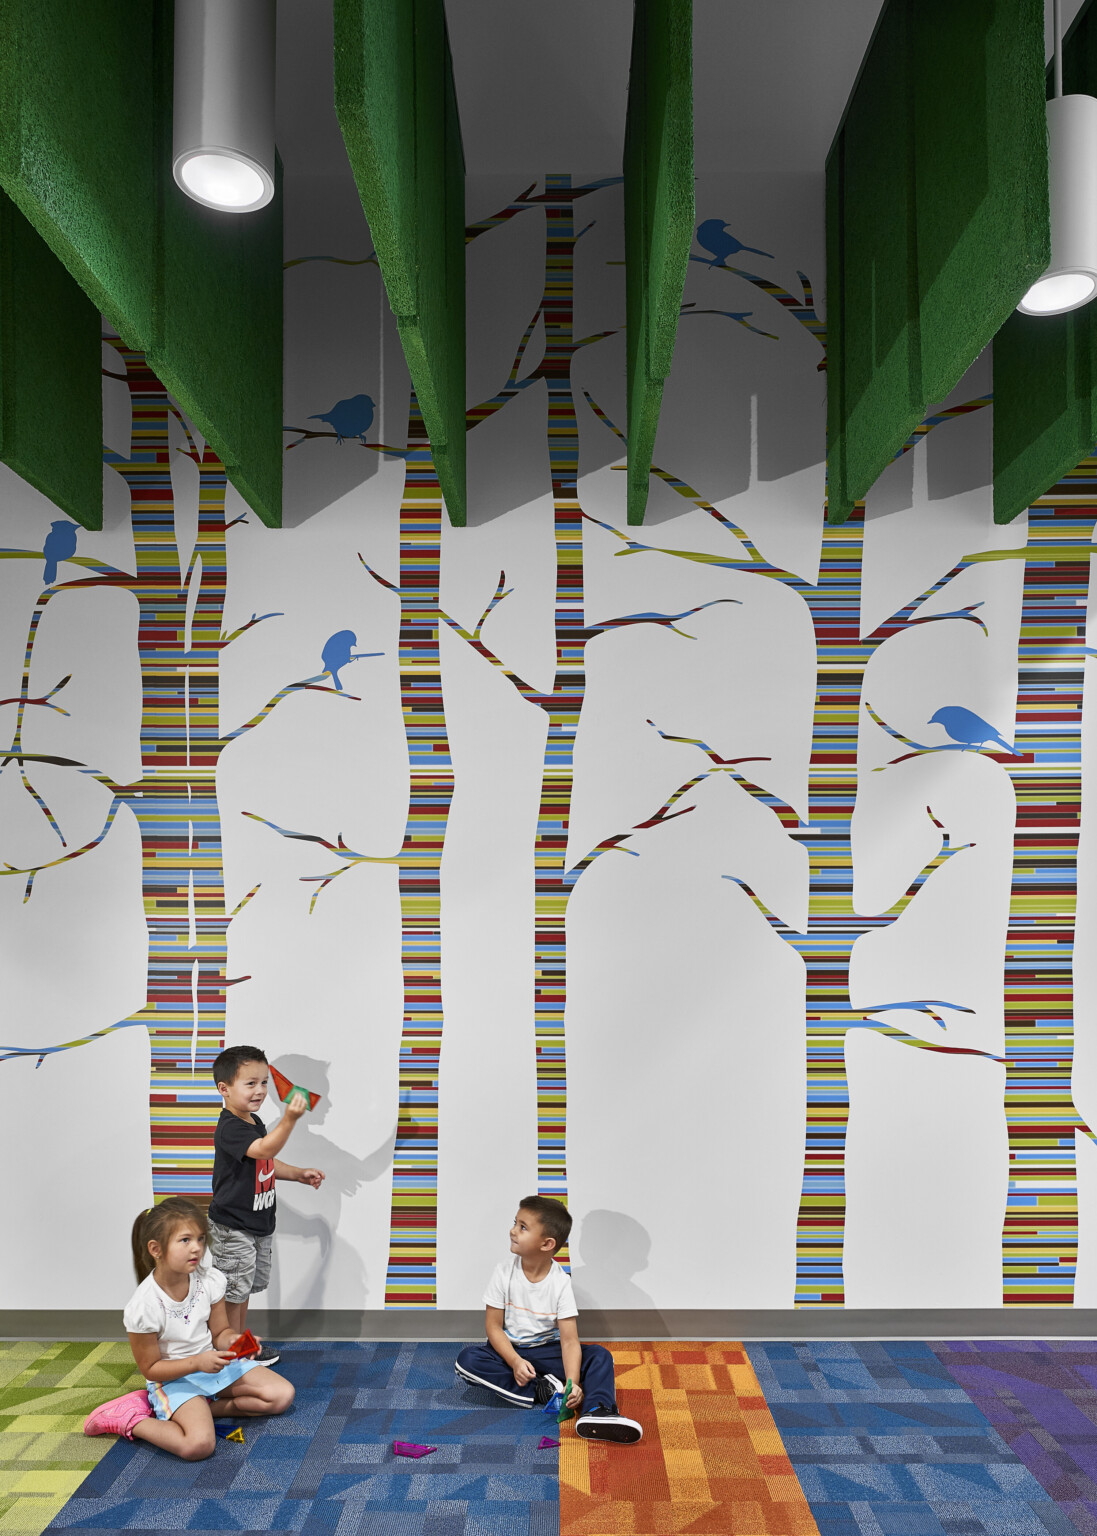 Students sit on multicolor carpet in front of striped tree mural with blue birds. Green acoustic panels hang above